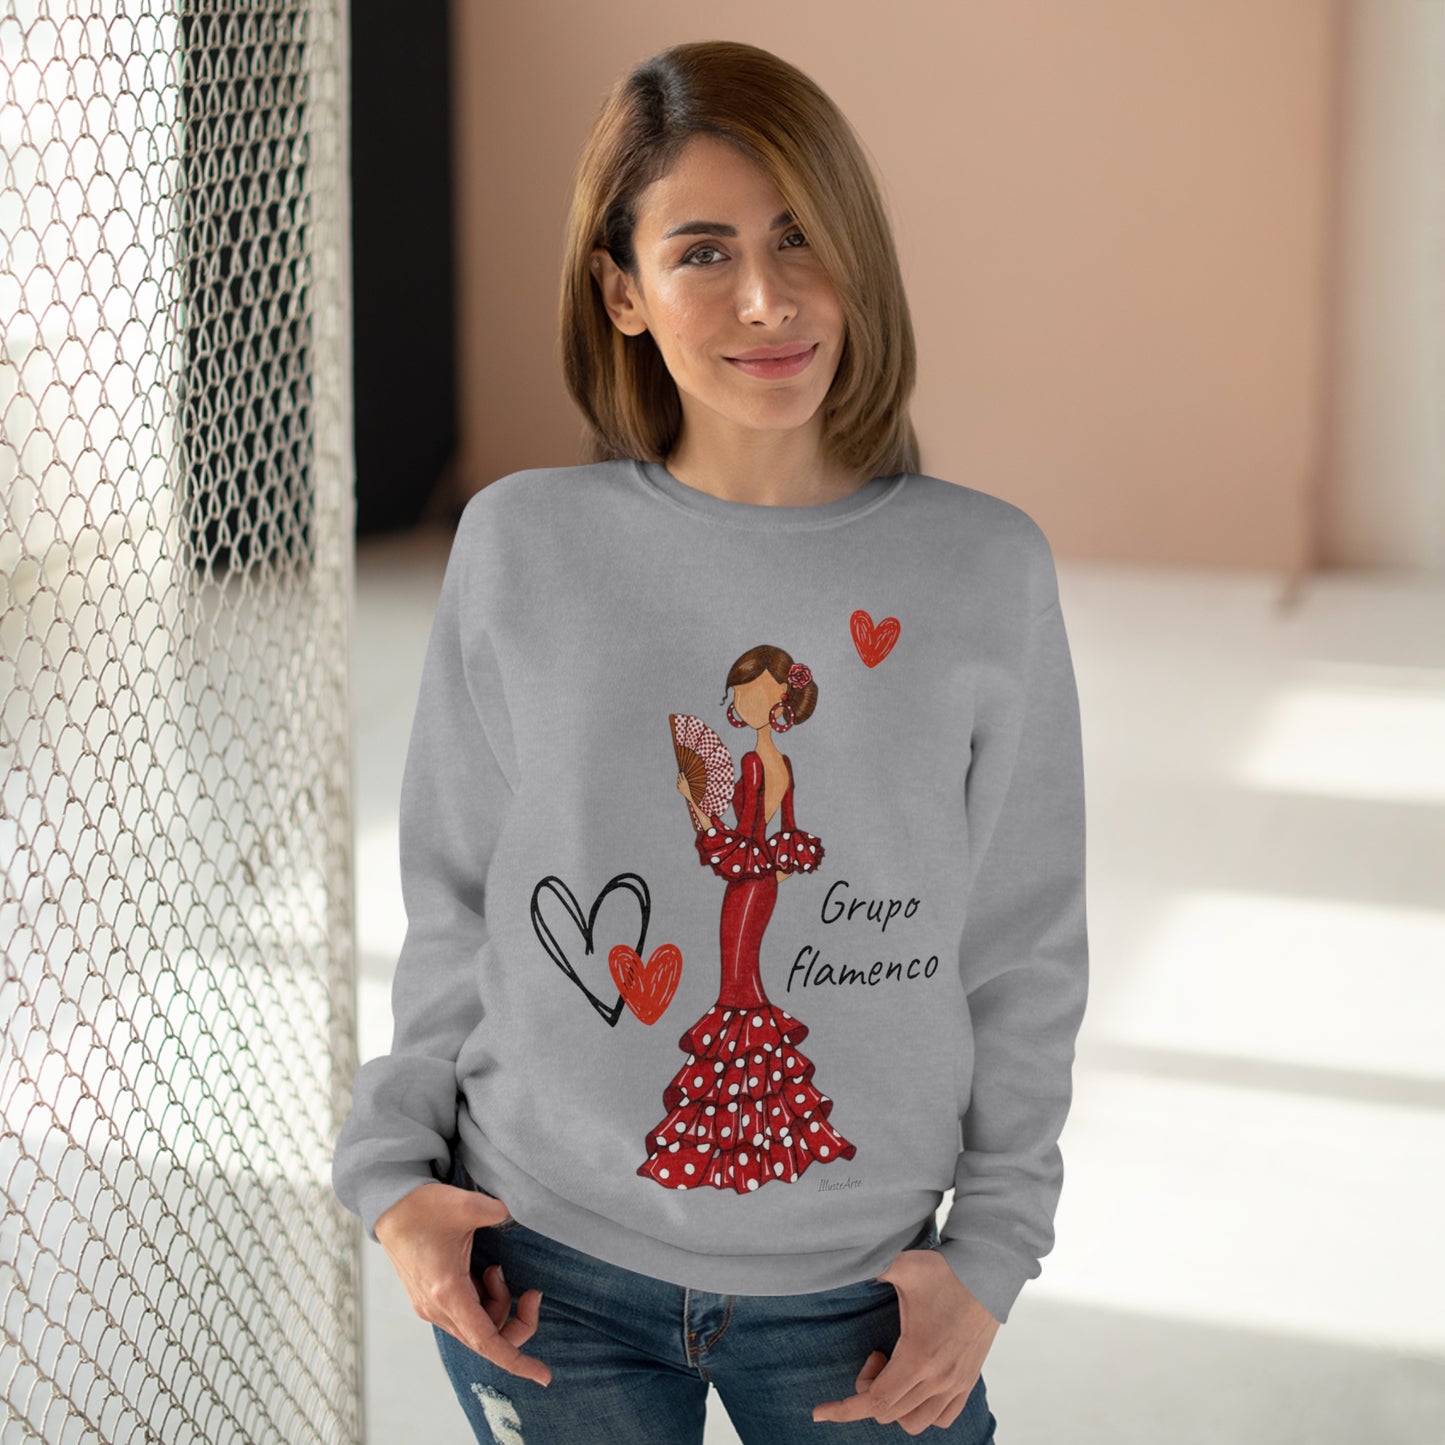 Flamenco lovers customizable gray Crewneck Sweatshirt, beautiful flamenco dancer in a red dress with white polka dots and a hand fan.